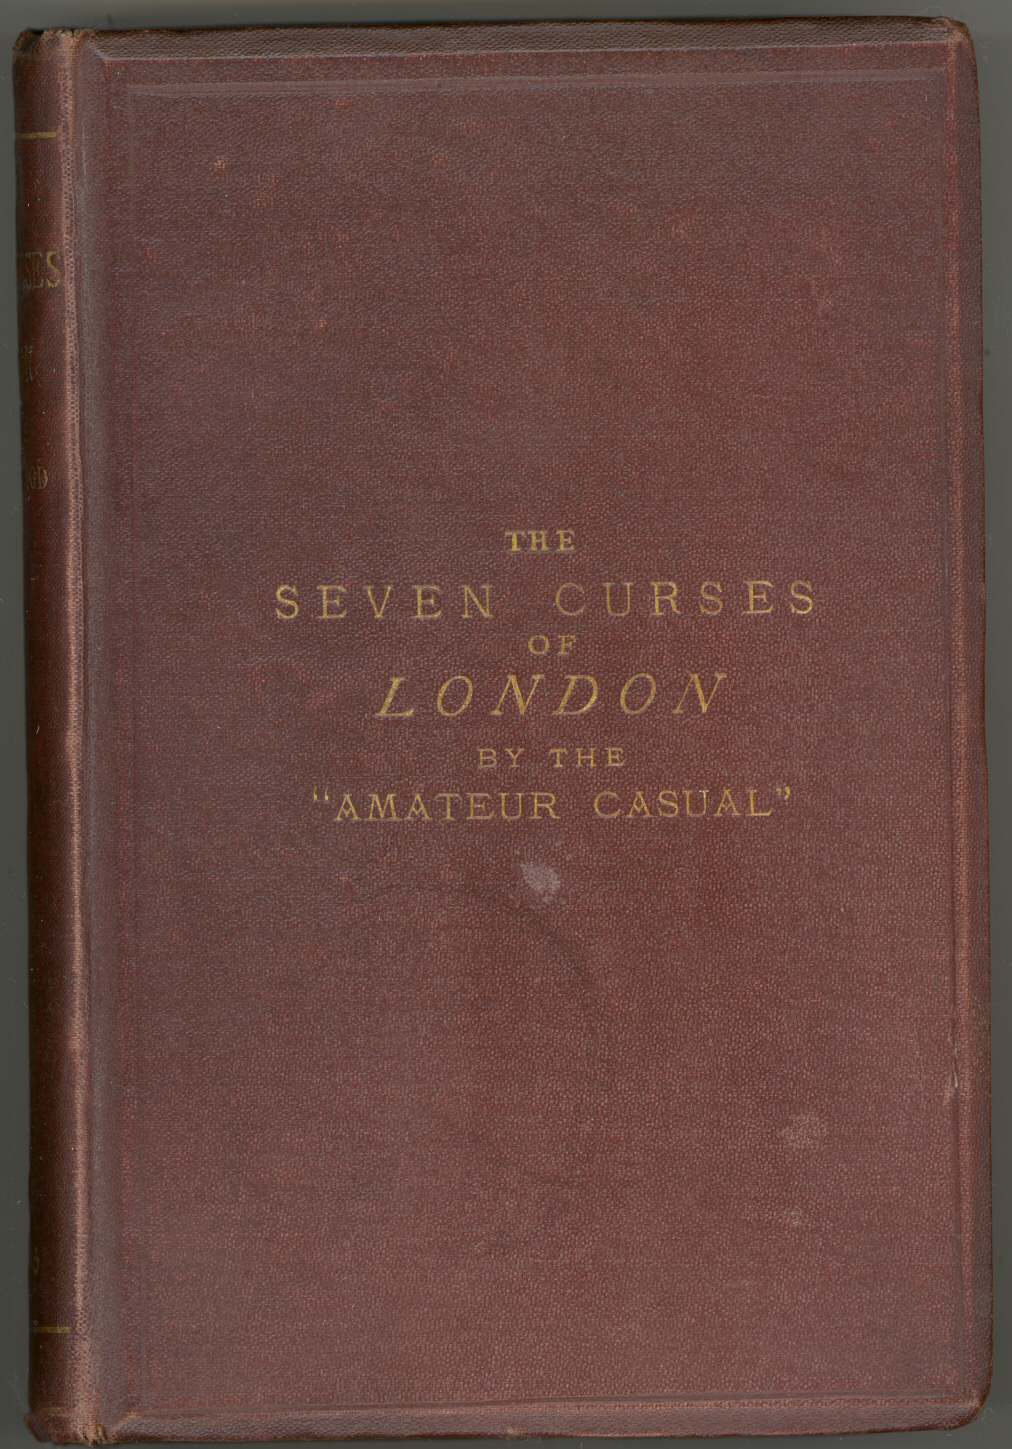 The Seven Curses of London, by James Greenwood photo